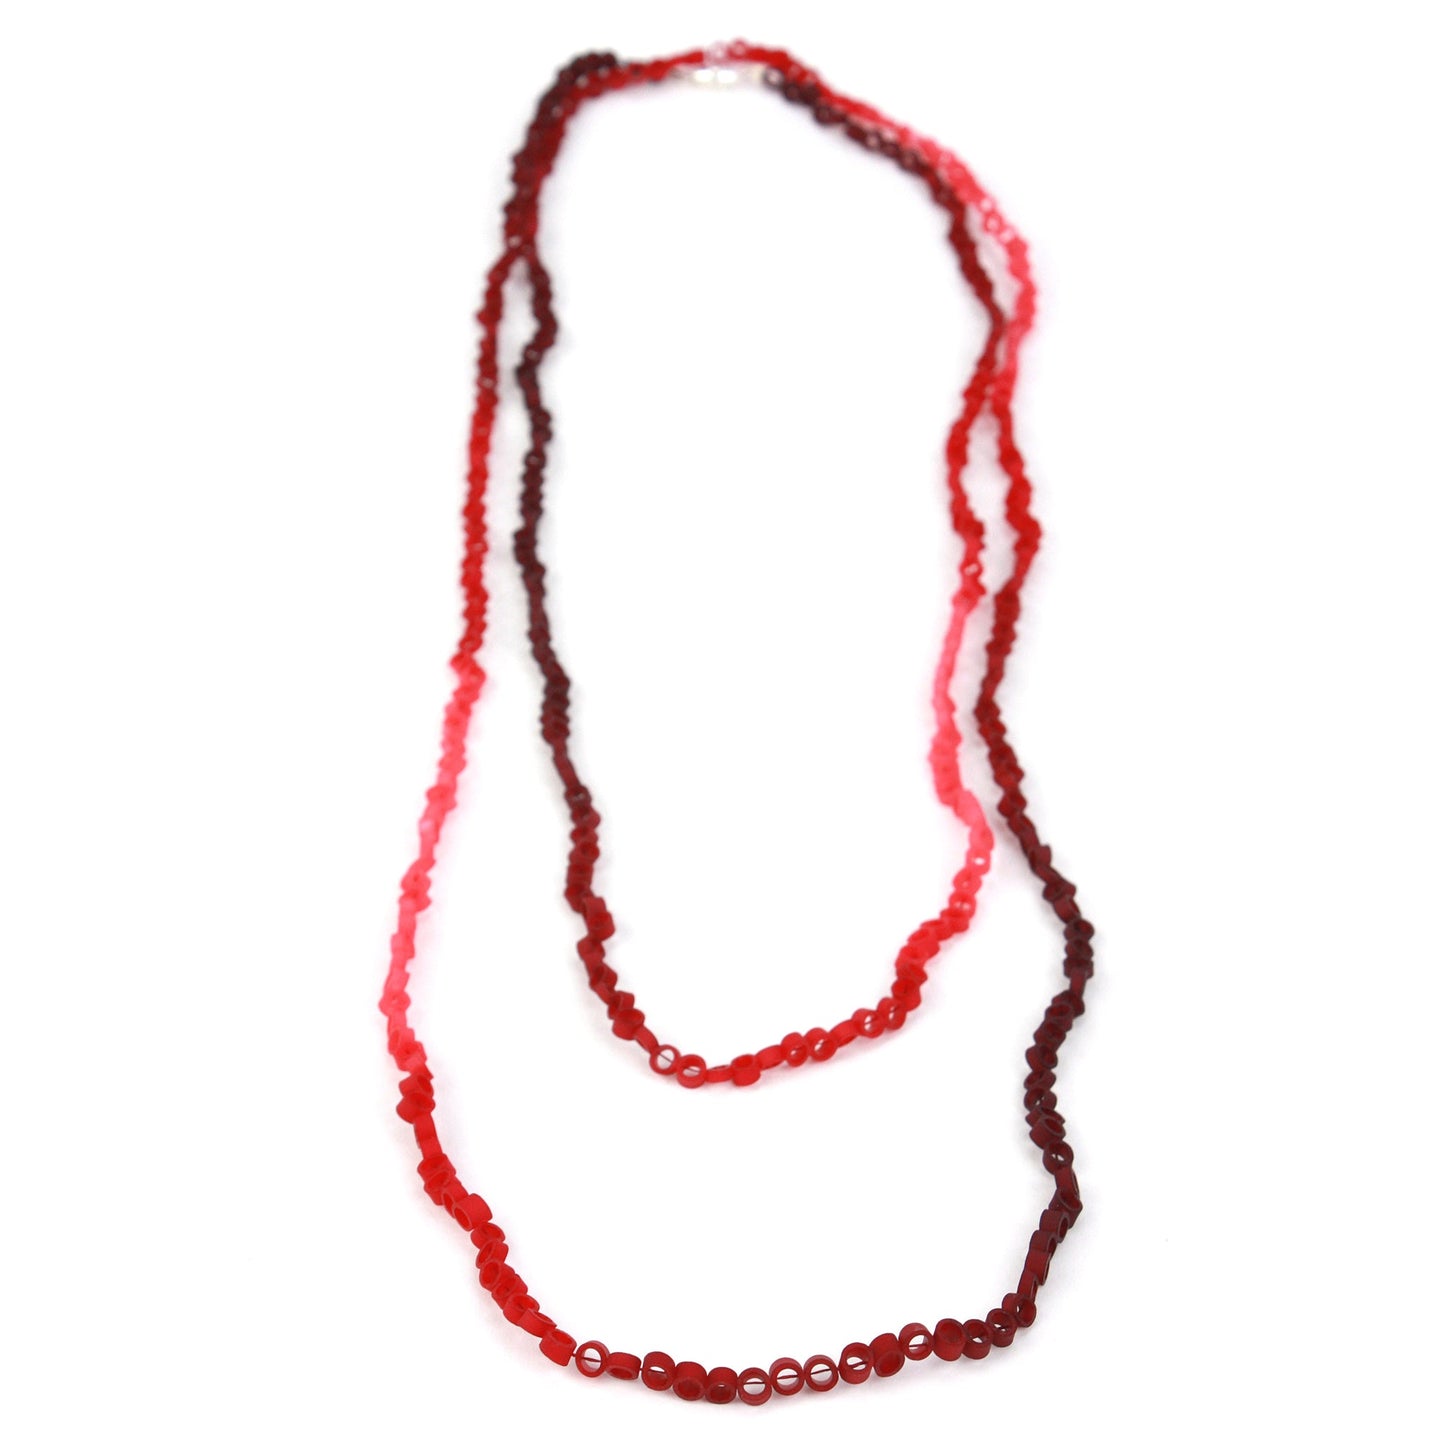 Little links necklace - Reds